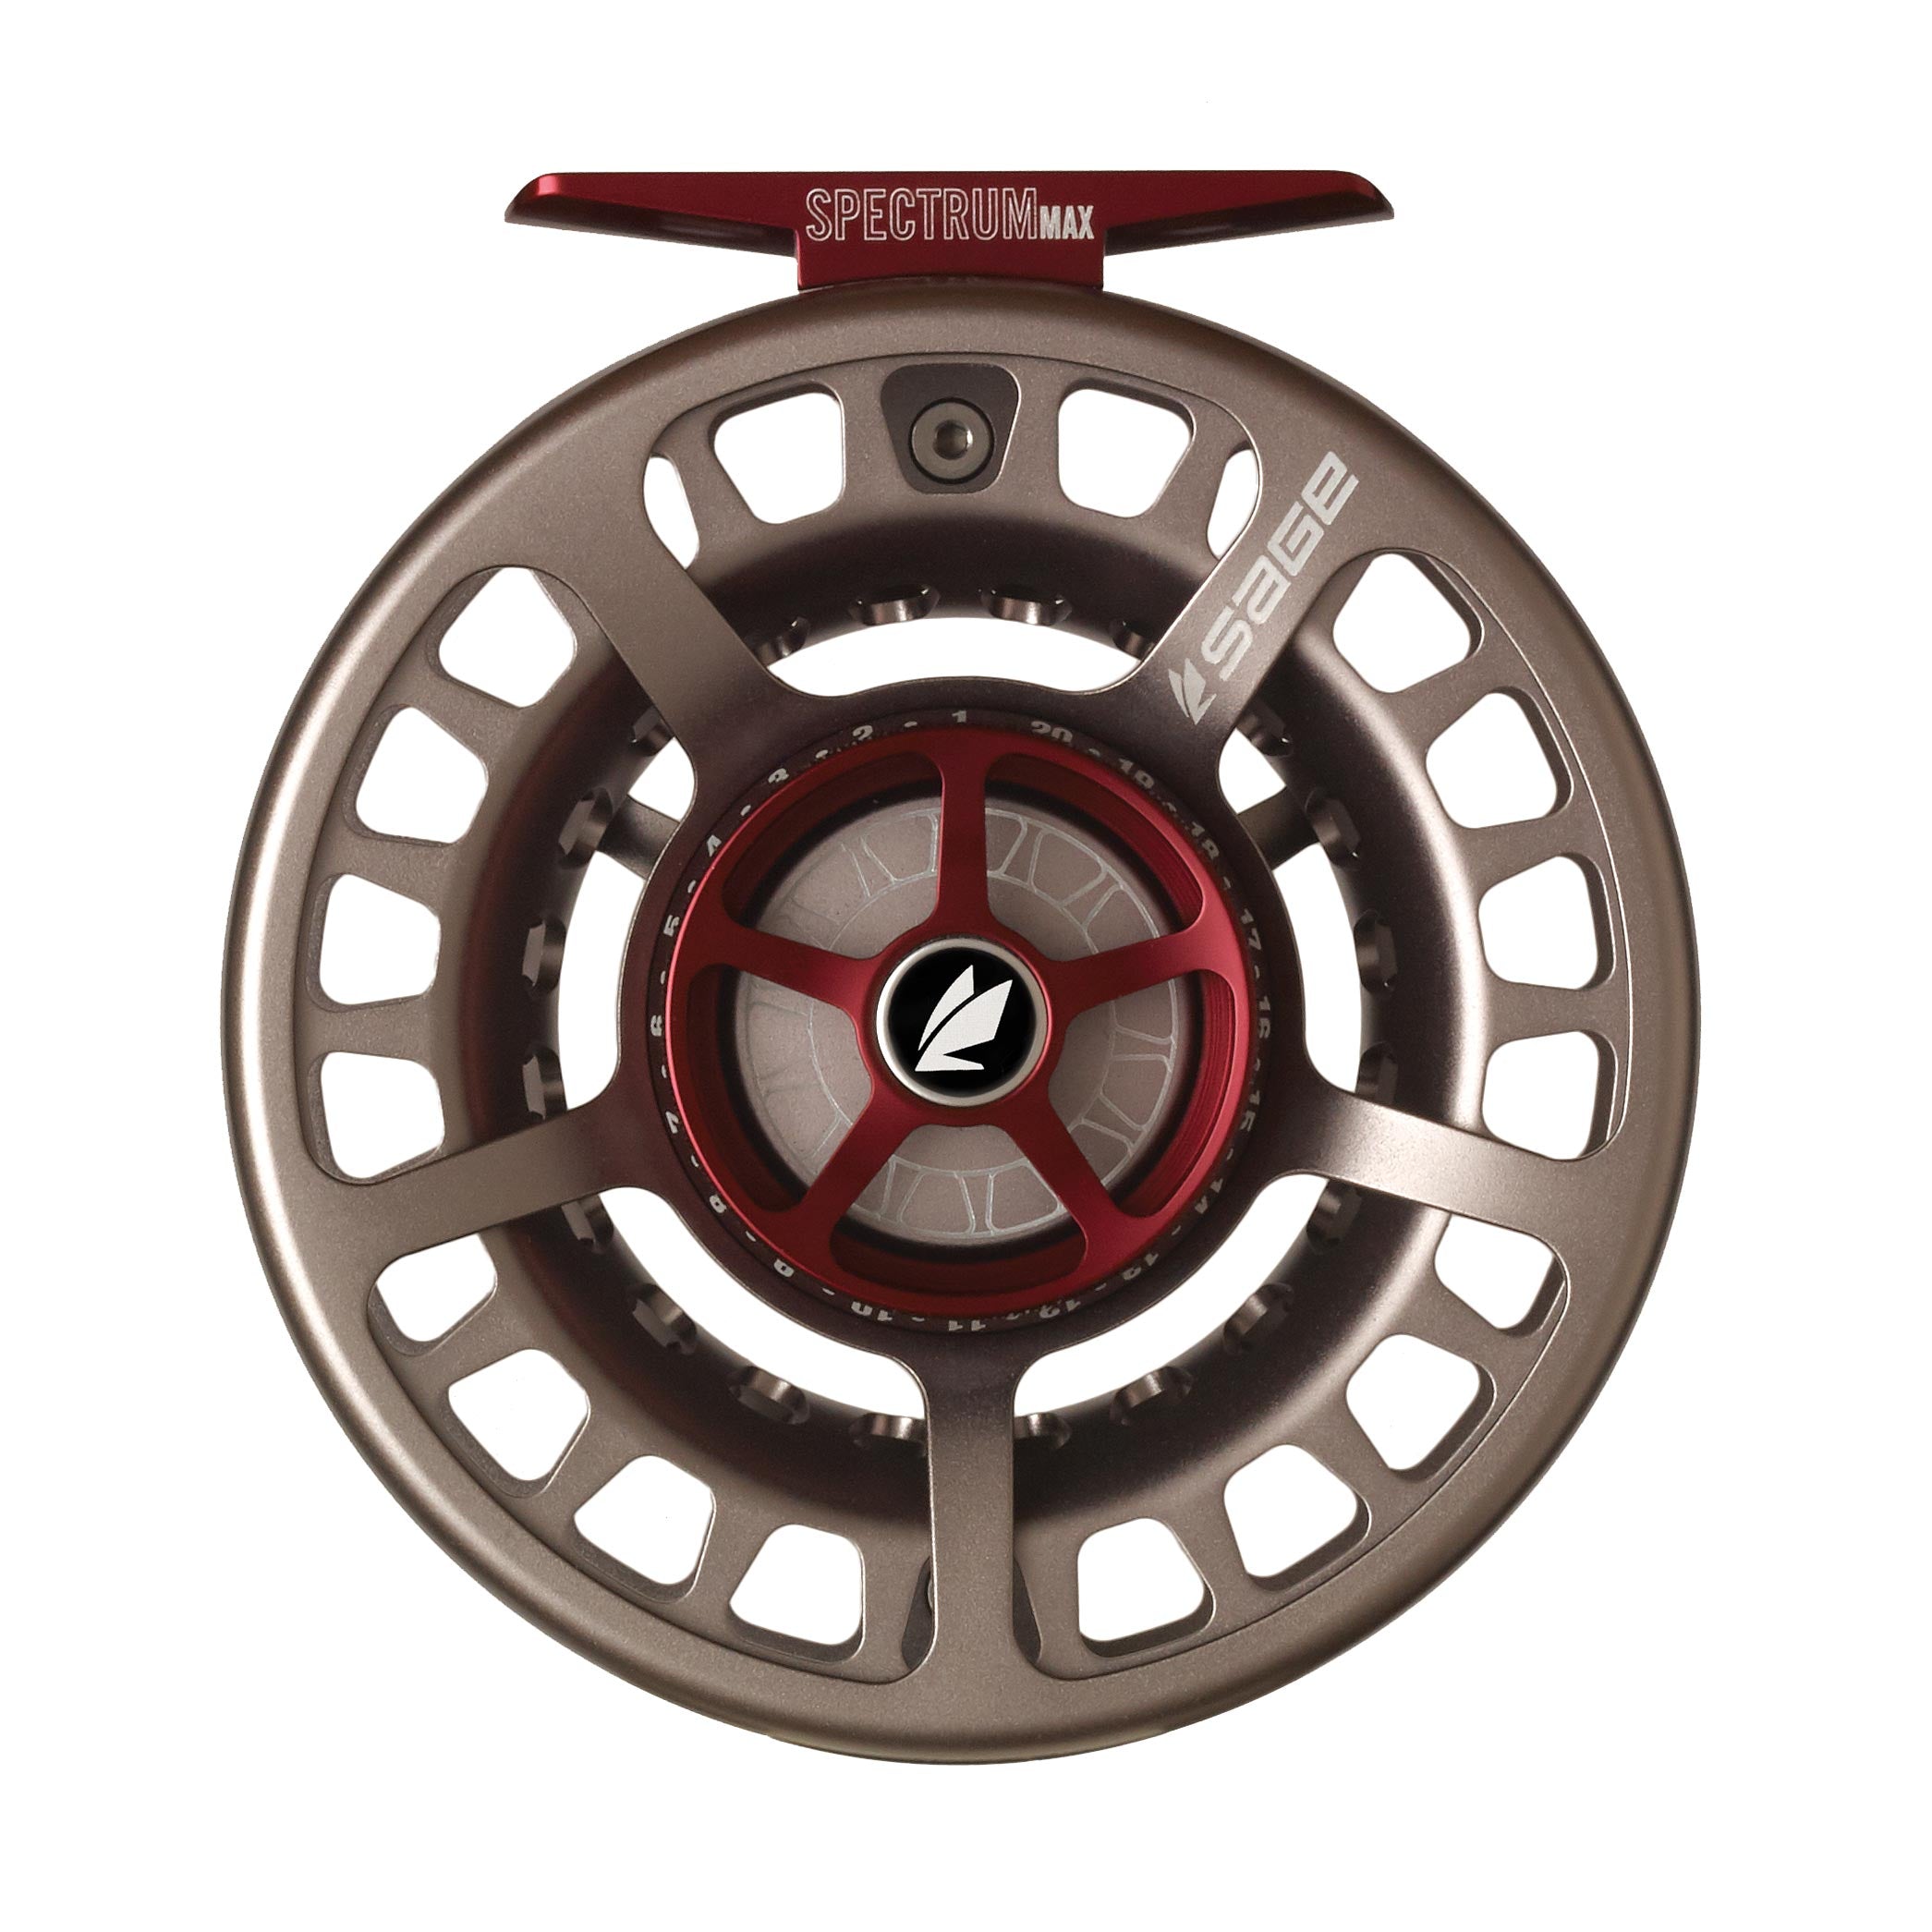 Sage SPECTRUM MAX Fly Reel in Chipotle - Discontinued